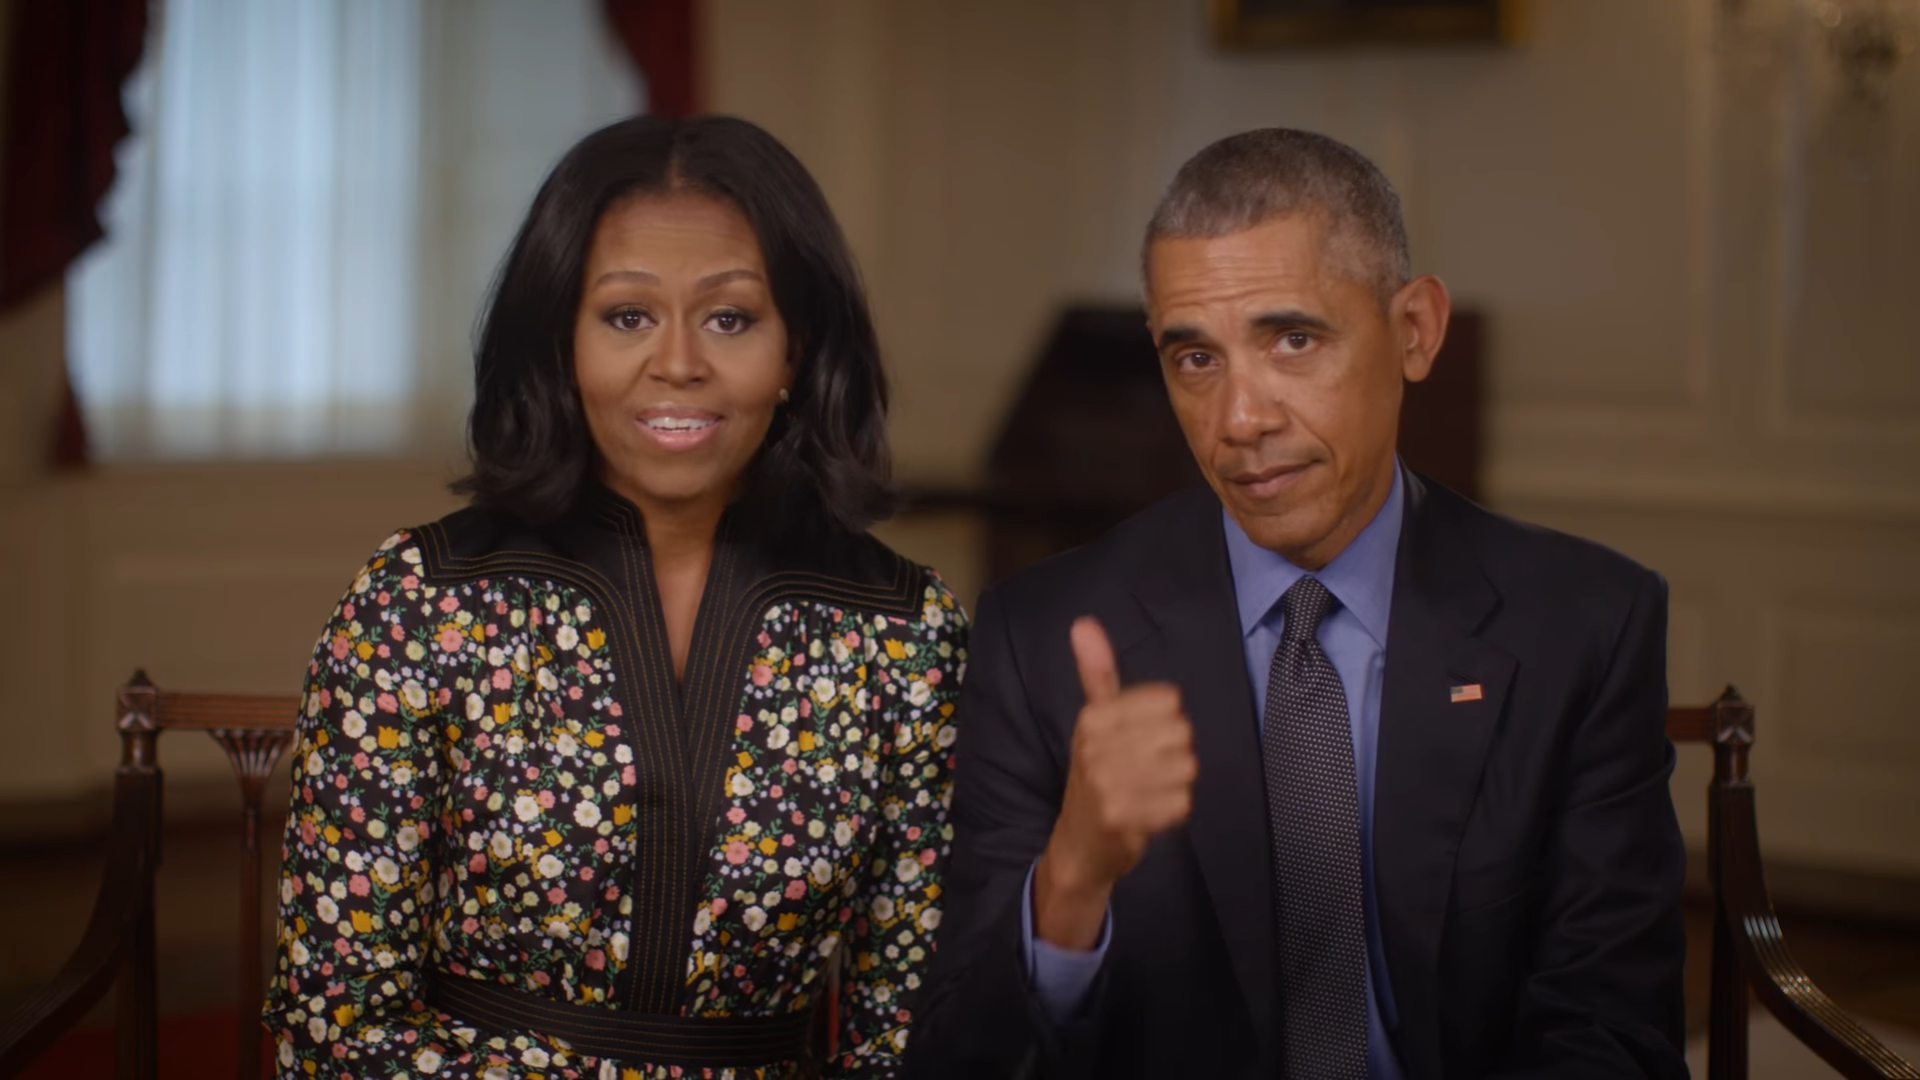 Barack Is 1st Up On The Michelle Obama Podcast Starting July 29th  [VIDEO]